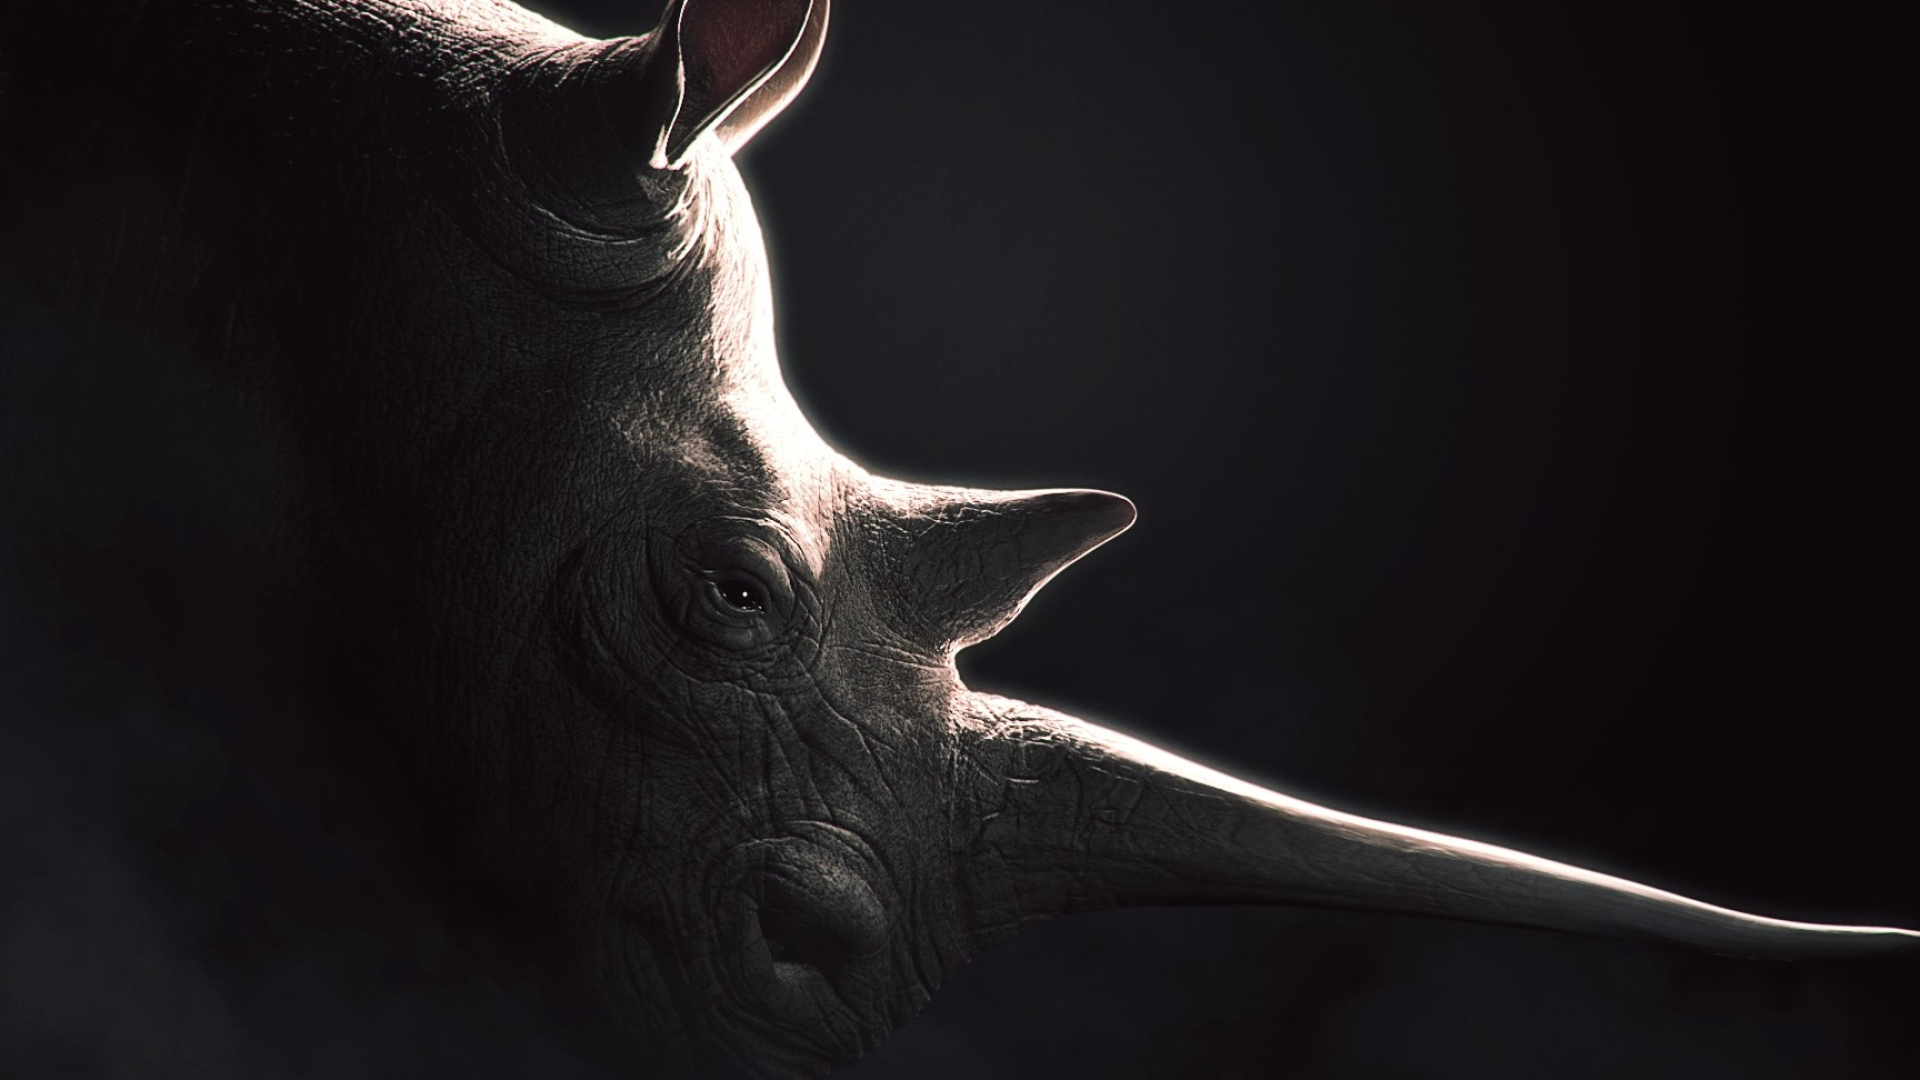 Rhino wallpapers, Rhino backgrounds, Desktop and mobile images, High-definition animal wallpapers, 1920x1080 Full HD Desktop